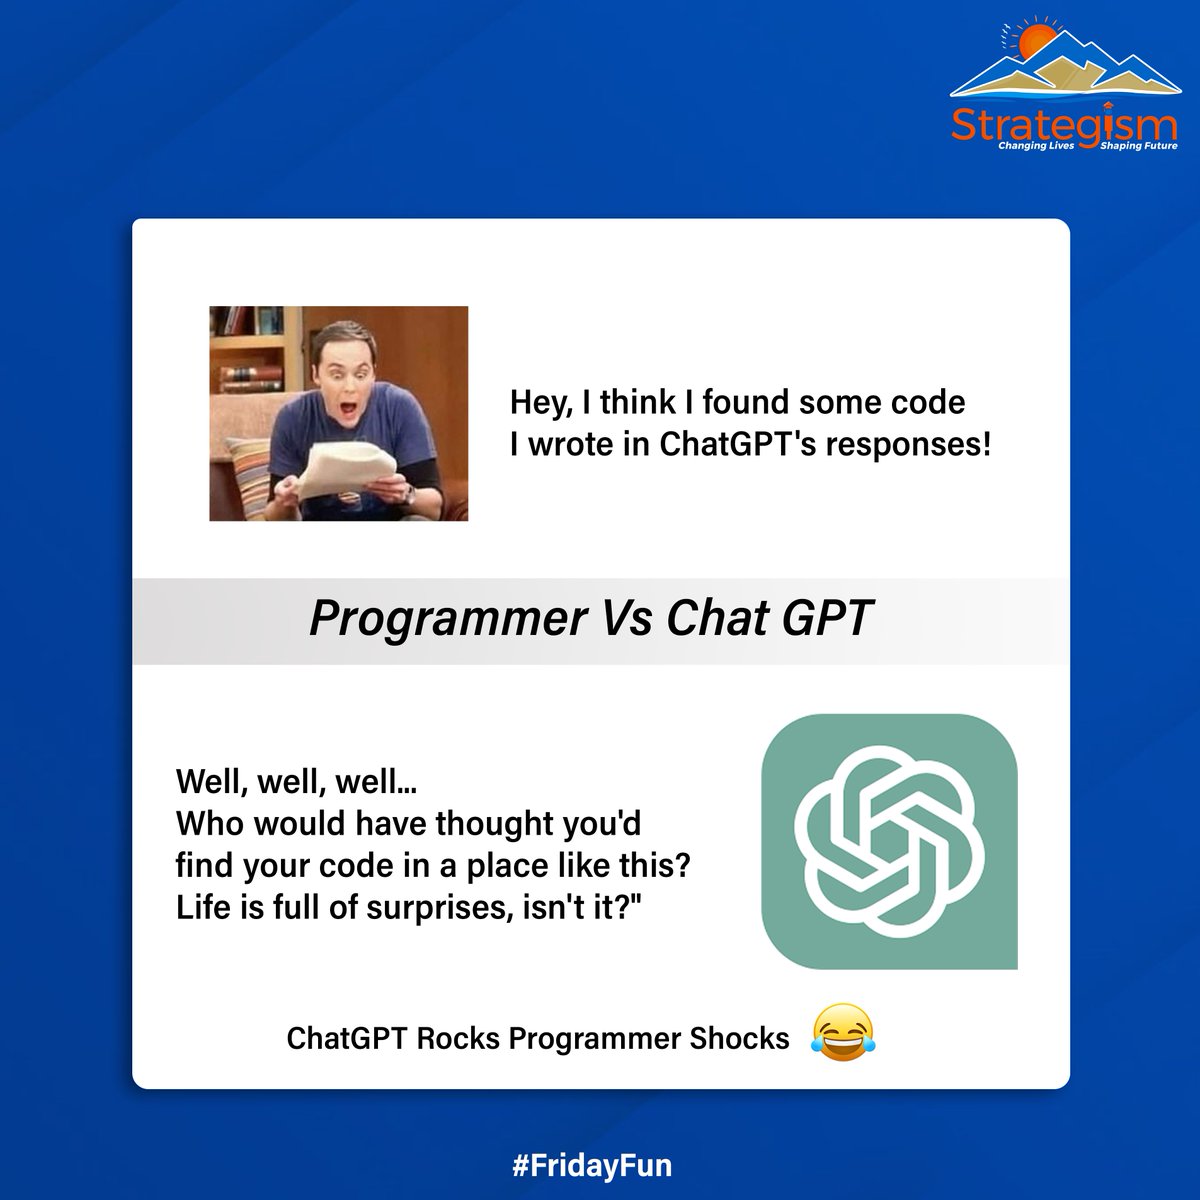 The surprising and typical situation! between Programmer and Chat GPT 😂

:
#coder #programmer #ai #chatgpt #memes #friday #fun #fridayfun #programmervschatgpt #memeday #newpost #strategism #drsam #onlinecourses